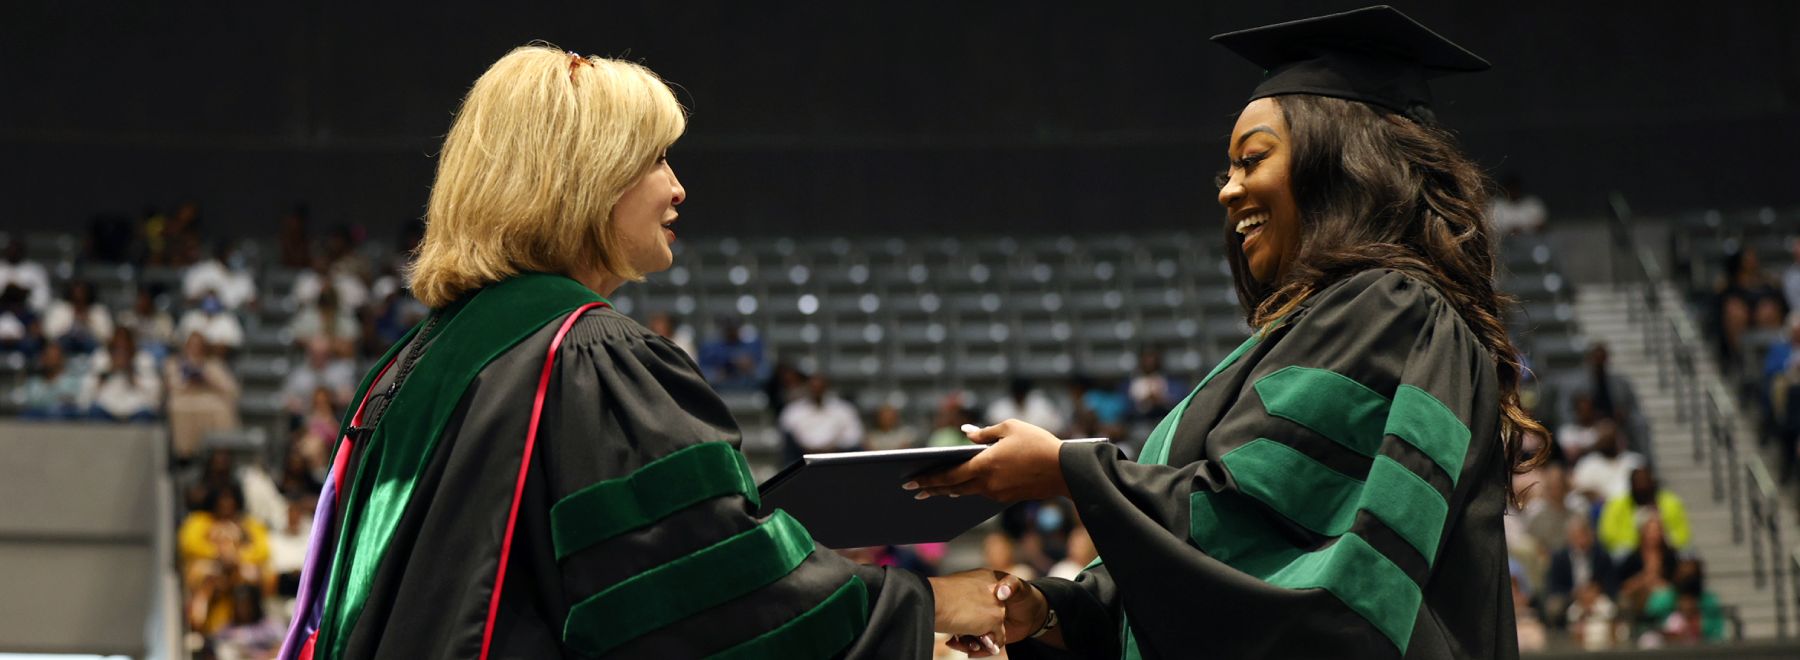 Dr. LouAnn Woodward, vice chancellor for health affairs and dean of the School of Medicine, confers degrees to students at graduation.